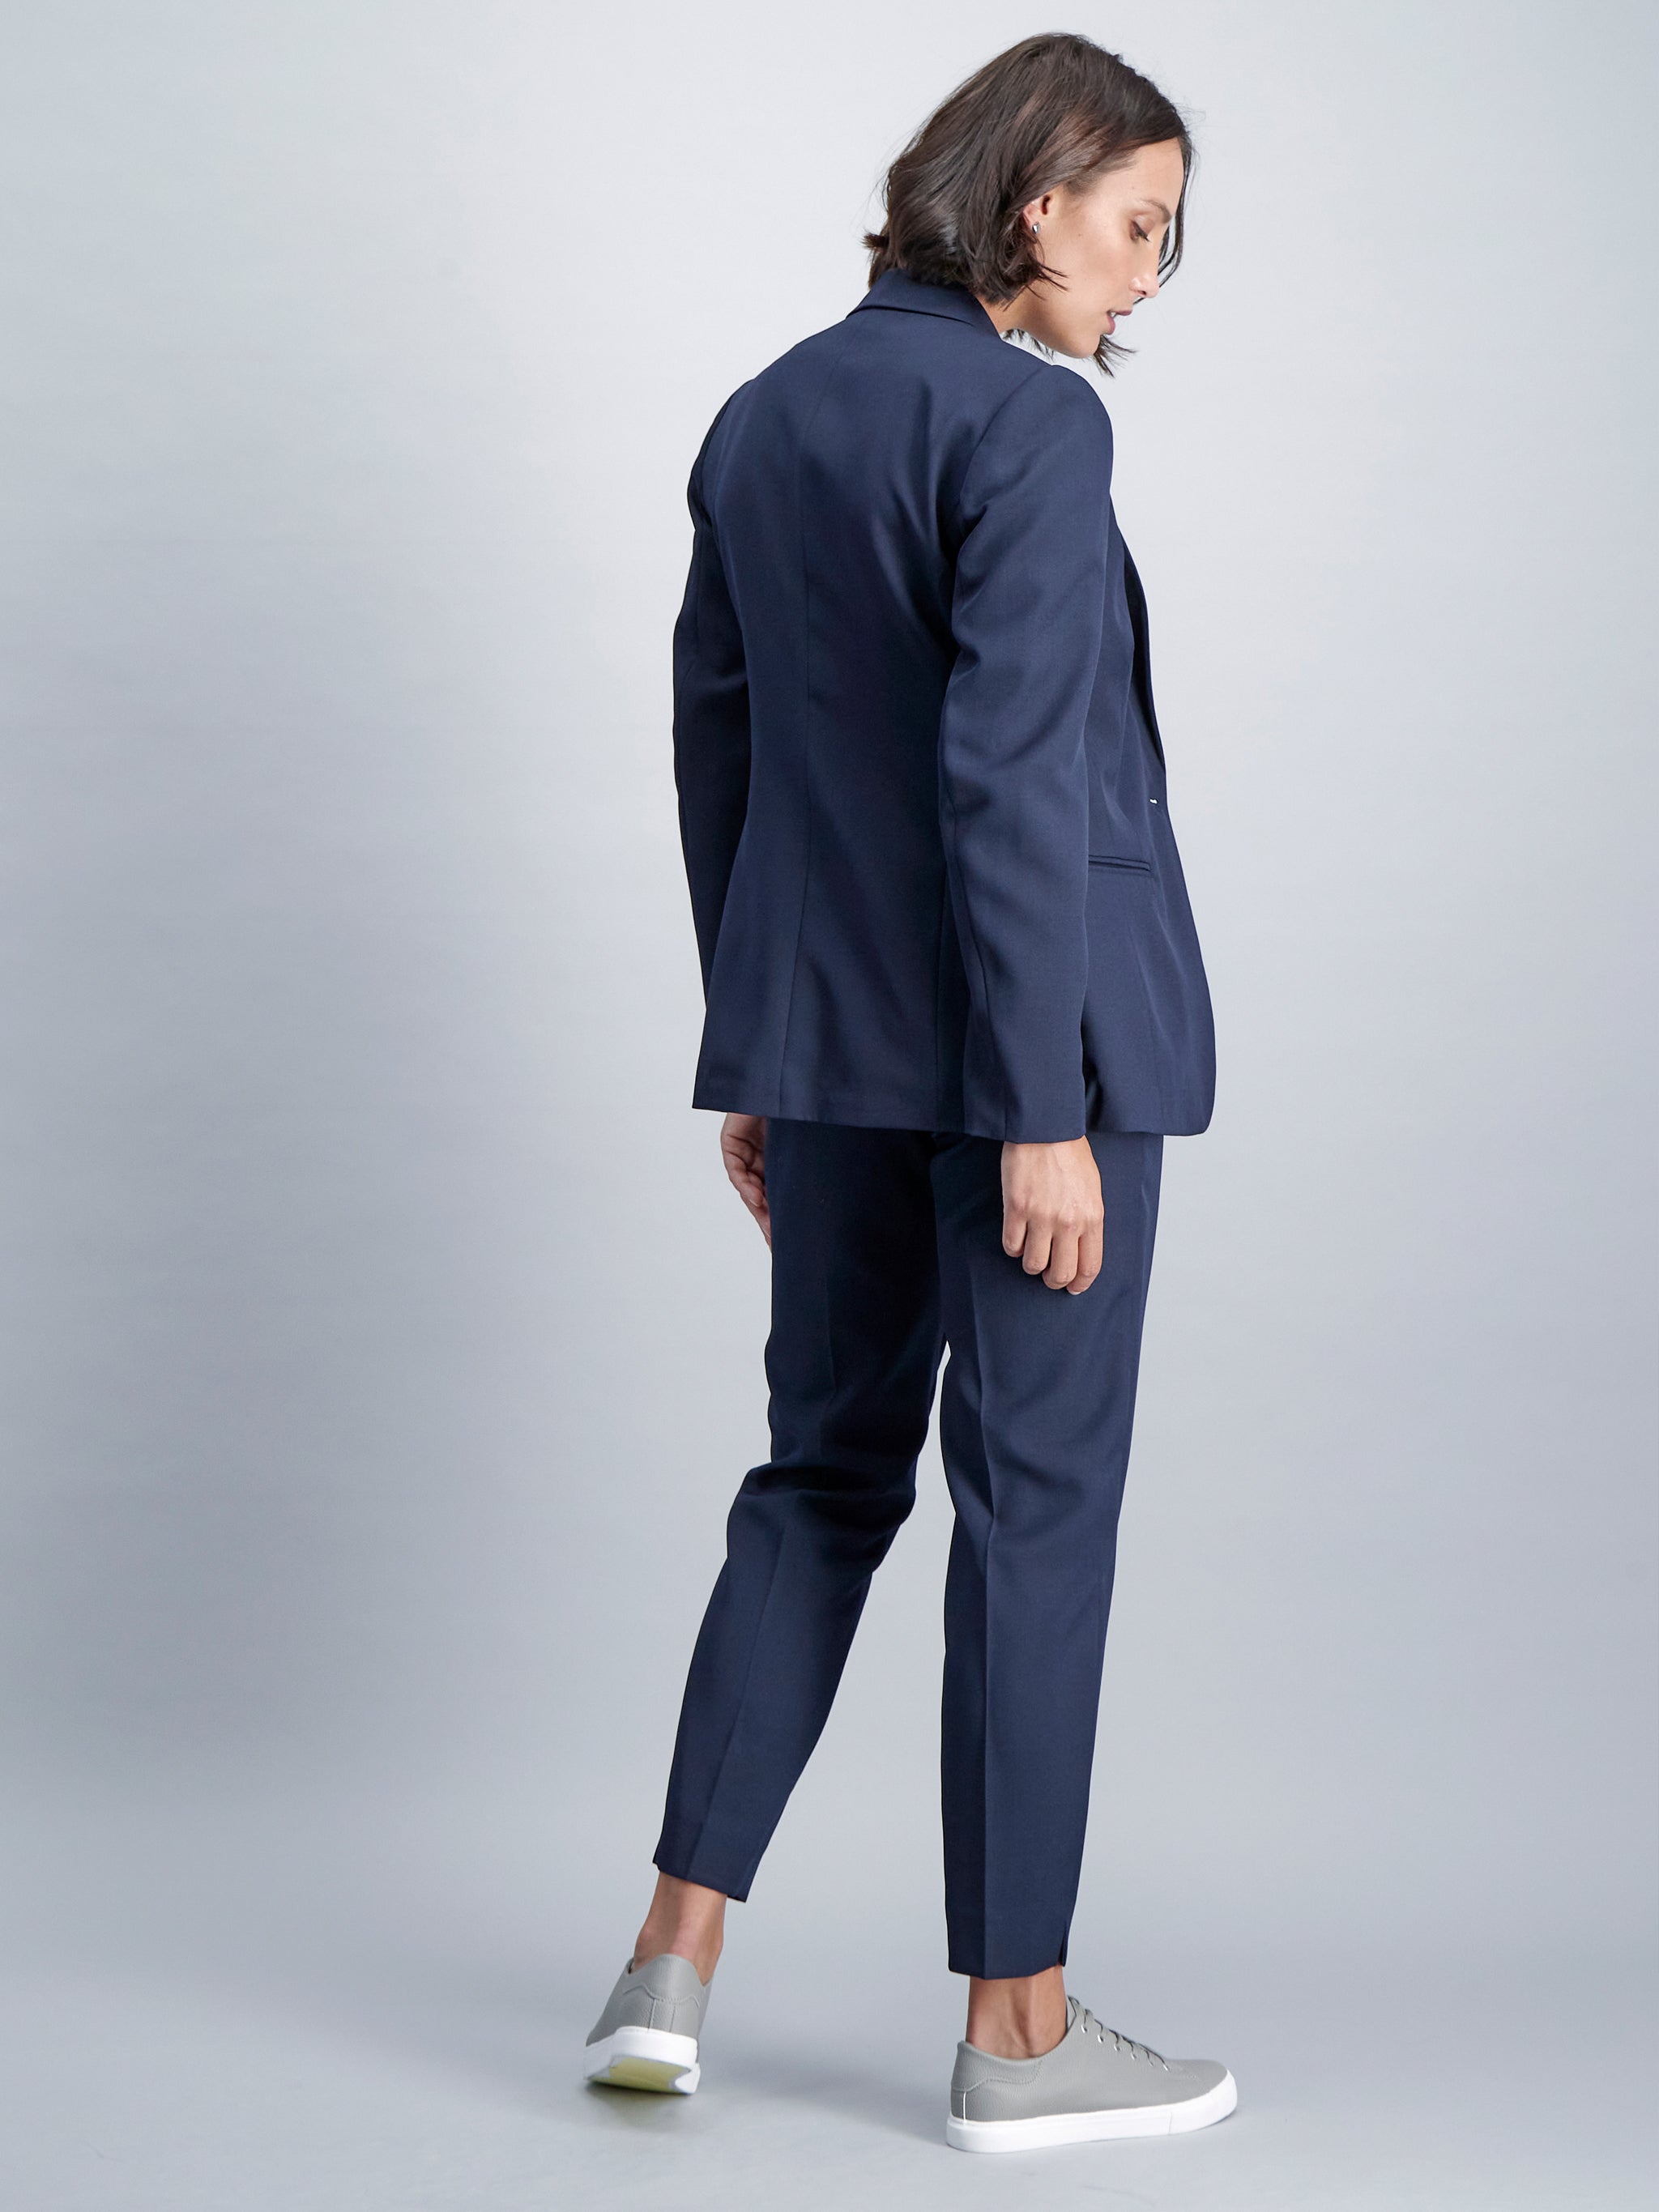 Cecily classic blazer - navy - Imagemakers (Pty) Ltd Trading as Imnow